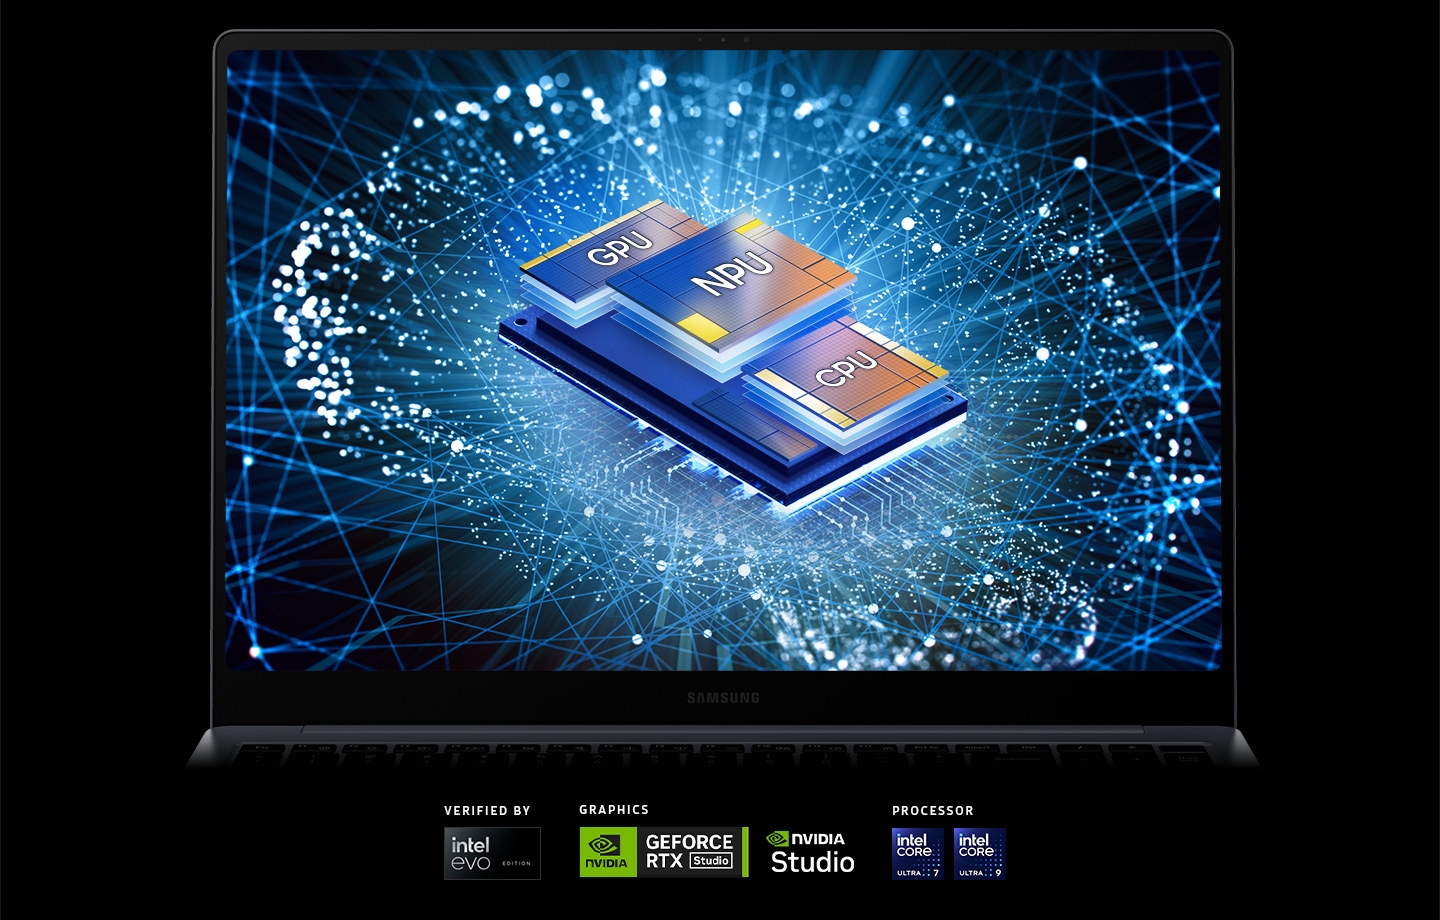 Galaxy Book4 Ultra is open, facing forward with a GPU, NPU and CPU chips shown in the center of an abstract brain matrix onscreen. VERIFIED BY Intel Evo Edition, NVIDIA GEFORCE RTX Studio GRAPHICS, NVIDIA Studio, Intel Core Ultra 7 and Intel Core Ultra 9 PROCESSOR logos are shown.